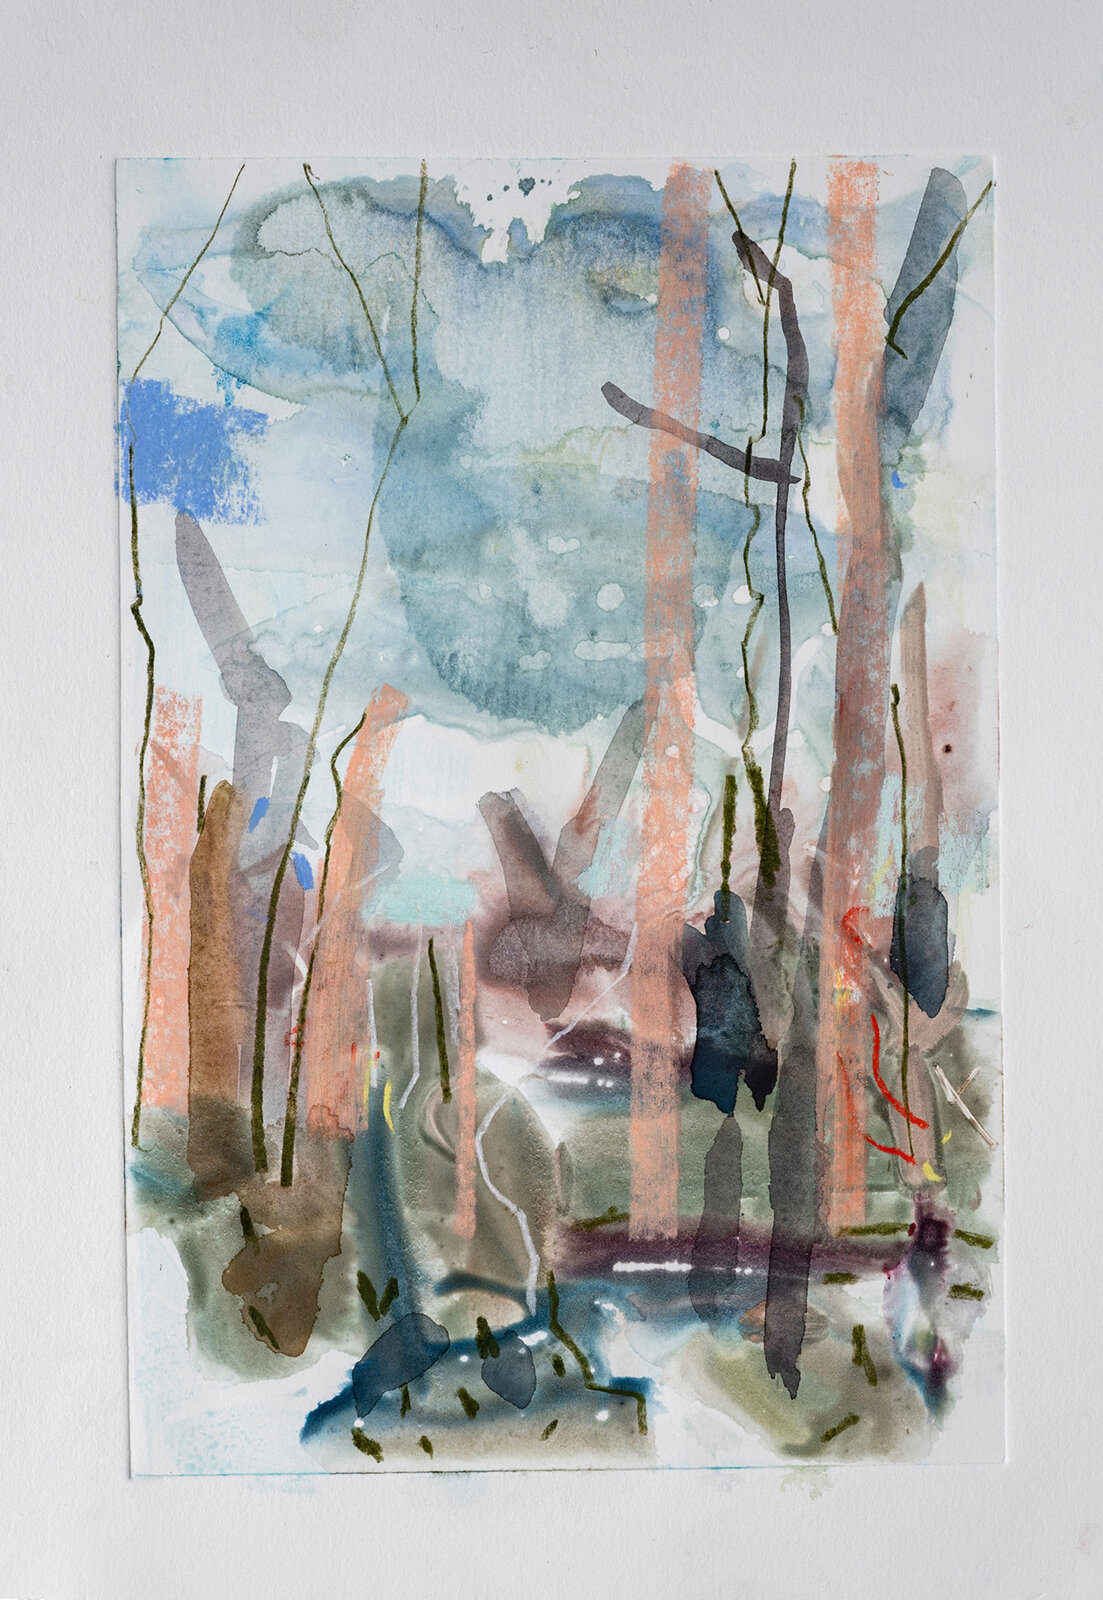   Boranup Forest No 1 , 2021, 55 x 44 cm, watercolour monoprint with pastel and pencil on paper  Collected 